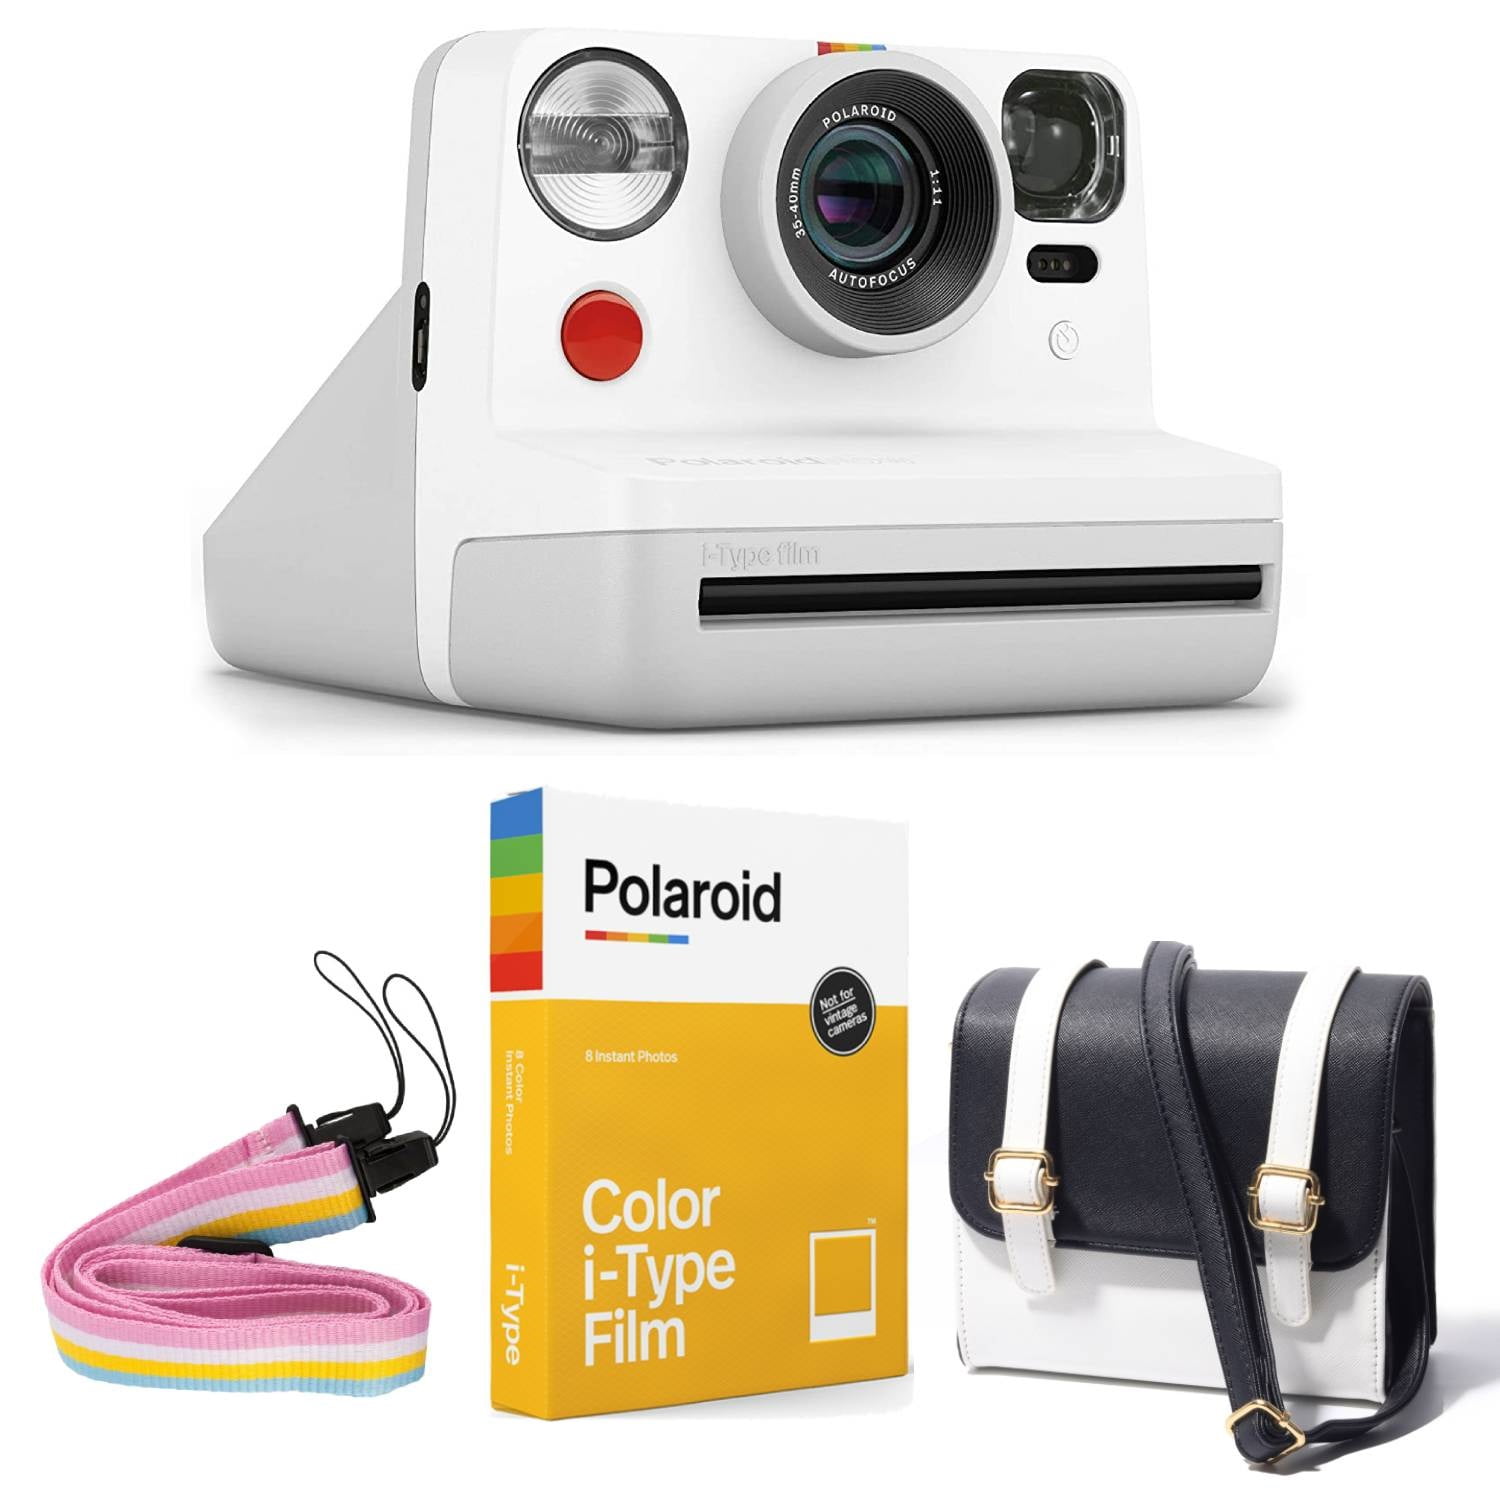 connie thayer recommends How To Put Strap On Polaroid Camera